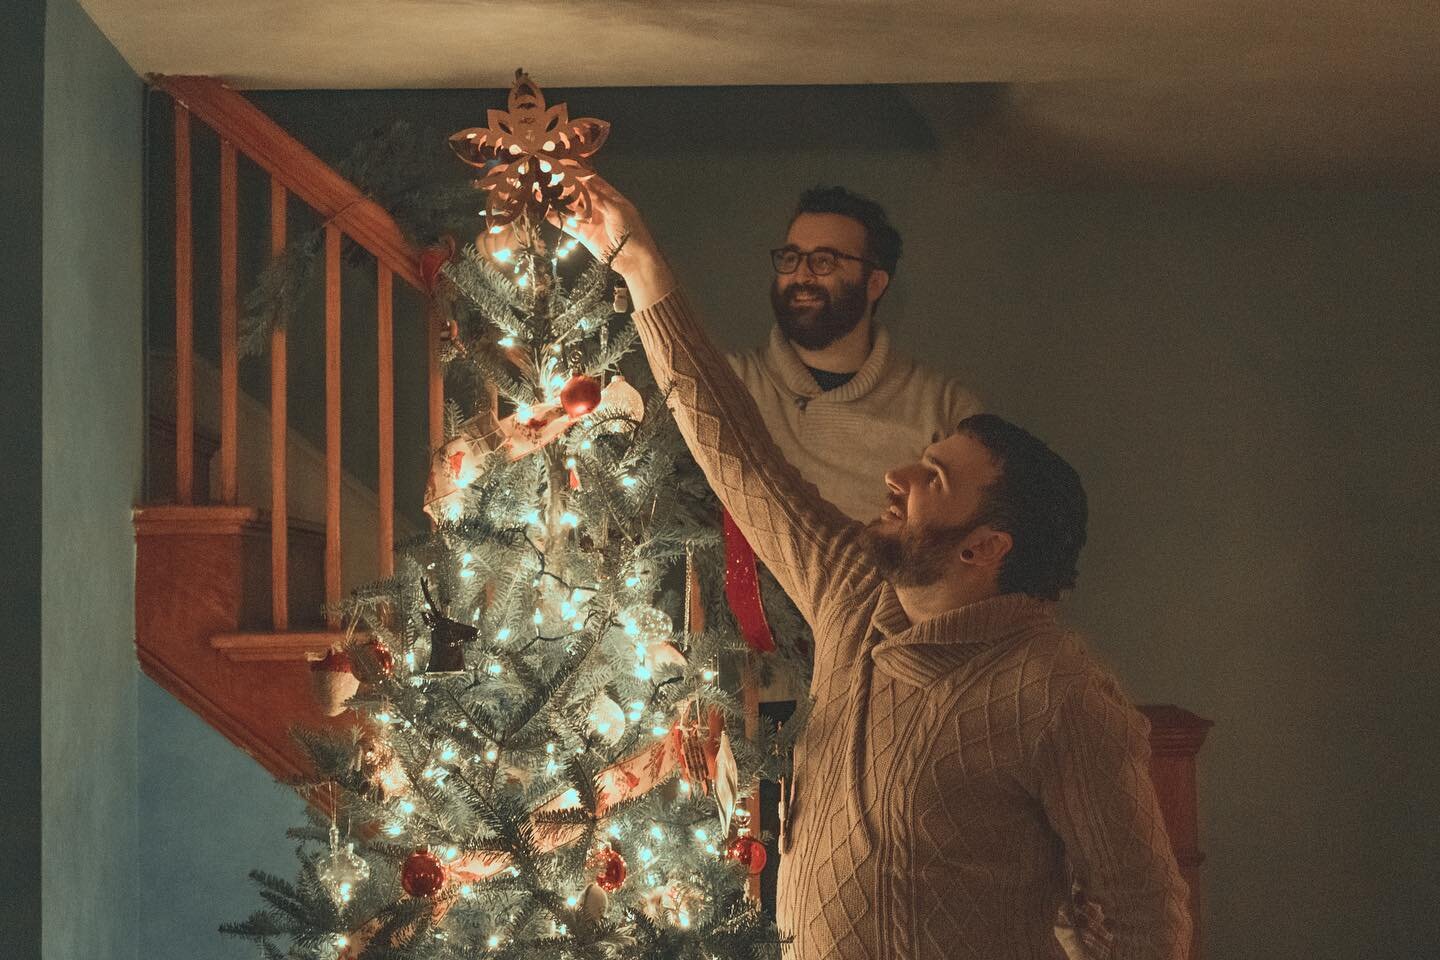 It was a delight to photograph this dynamic duo! Make the Yule-tide gay🎄❤️